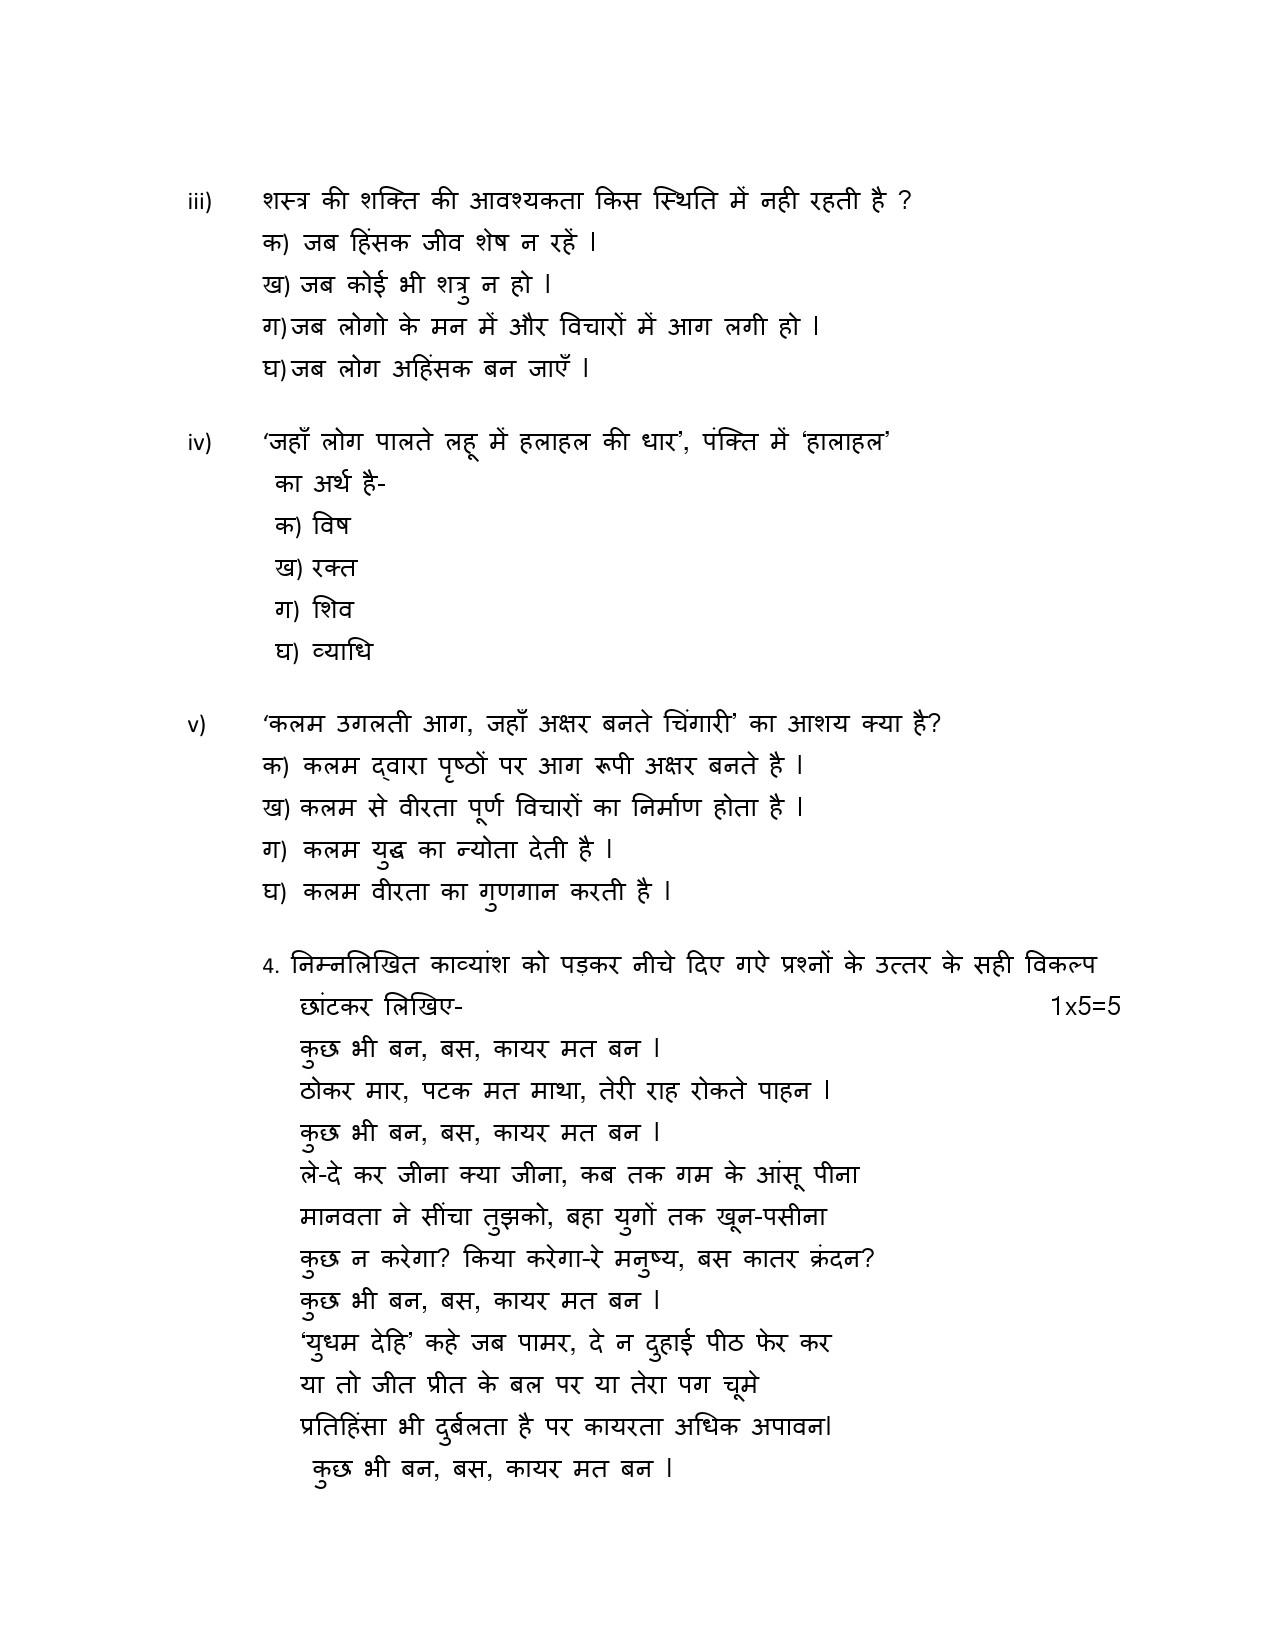 Hindi A CBSE Class X Sample Question Paper 2015 16 - Image 5